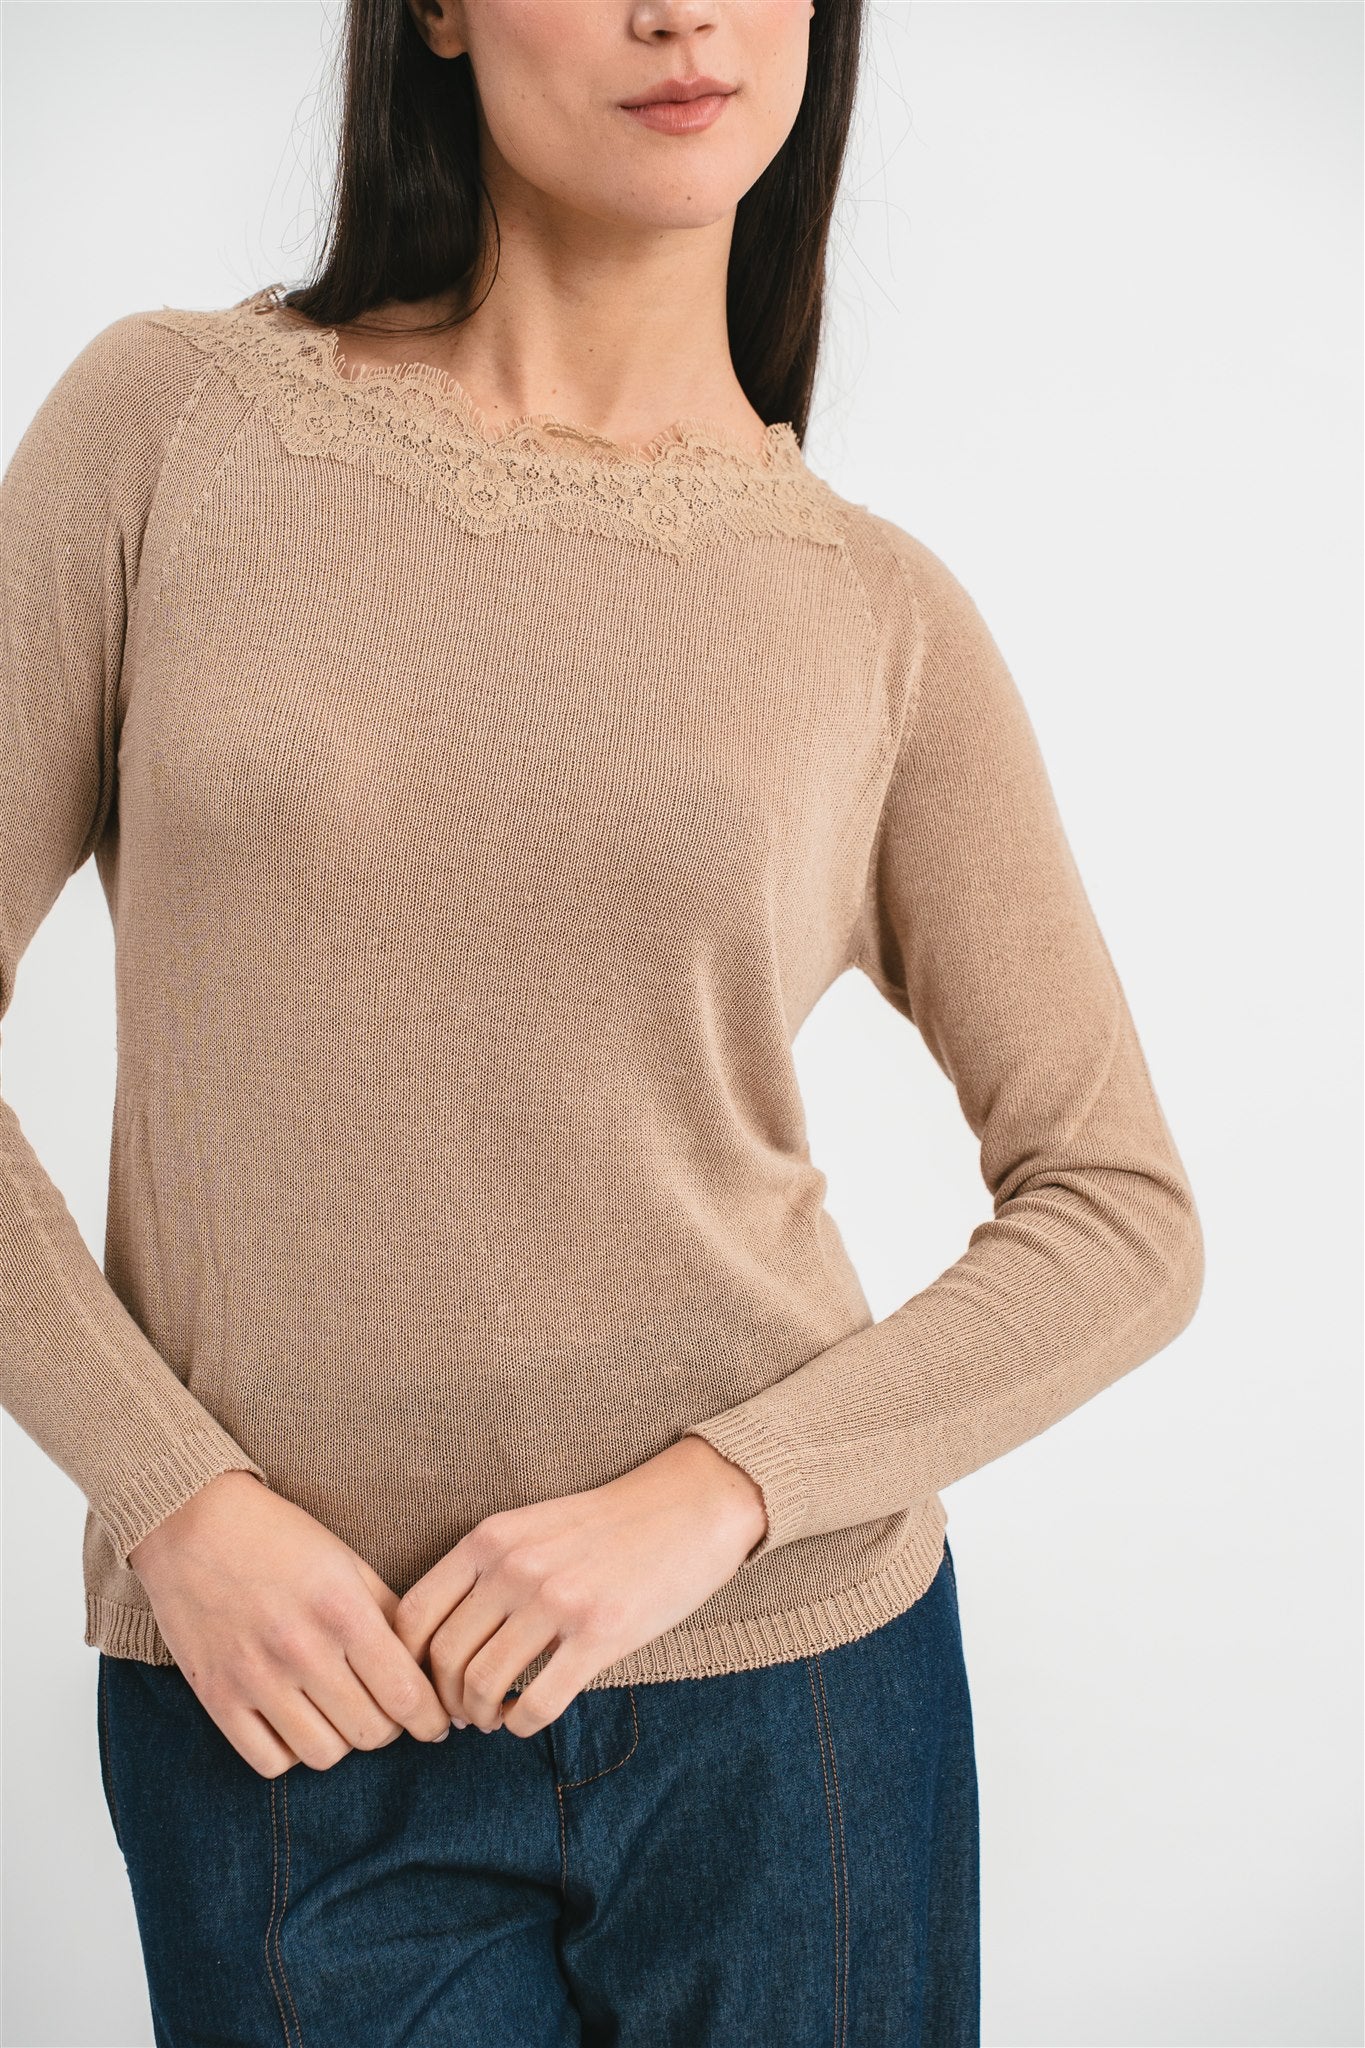 Boat neck sweater with lace details